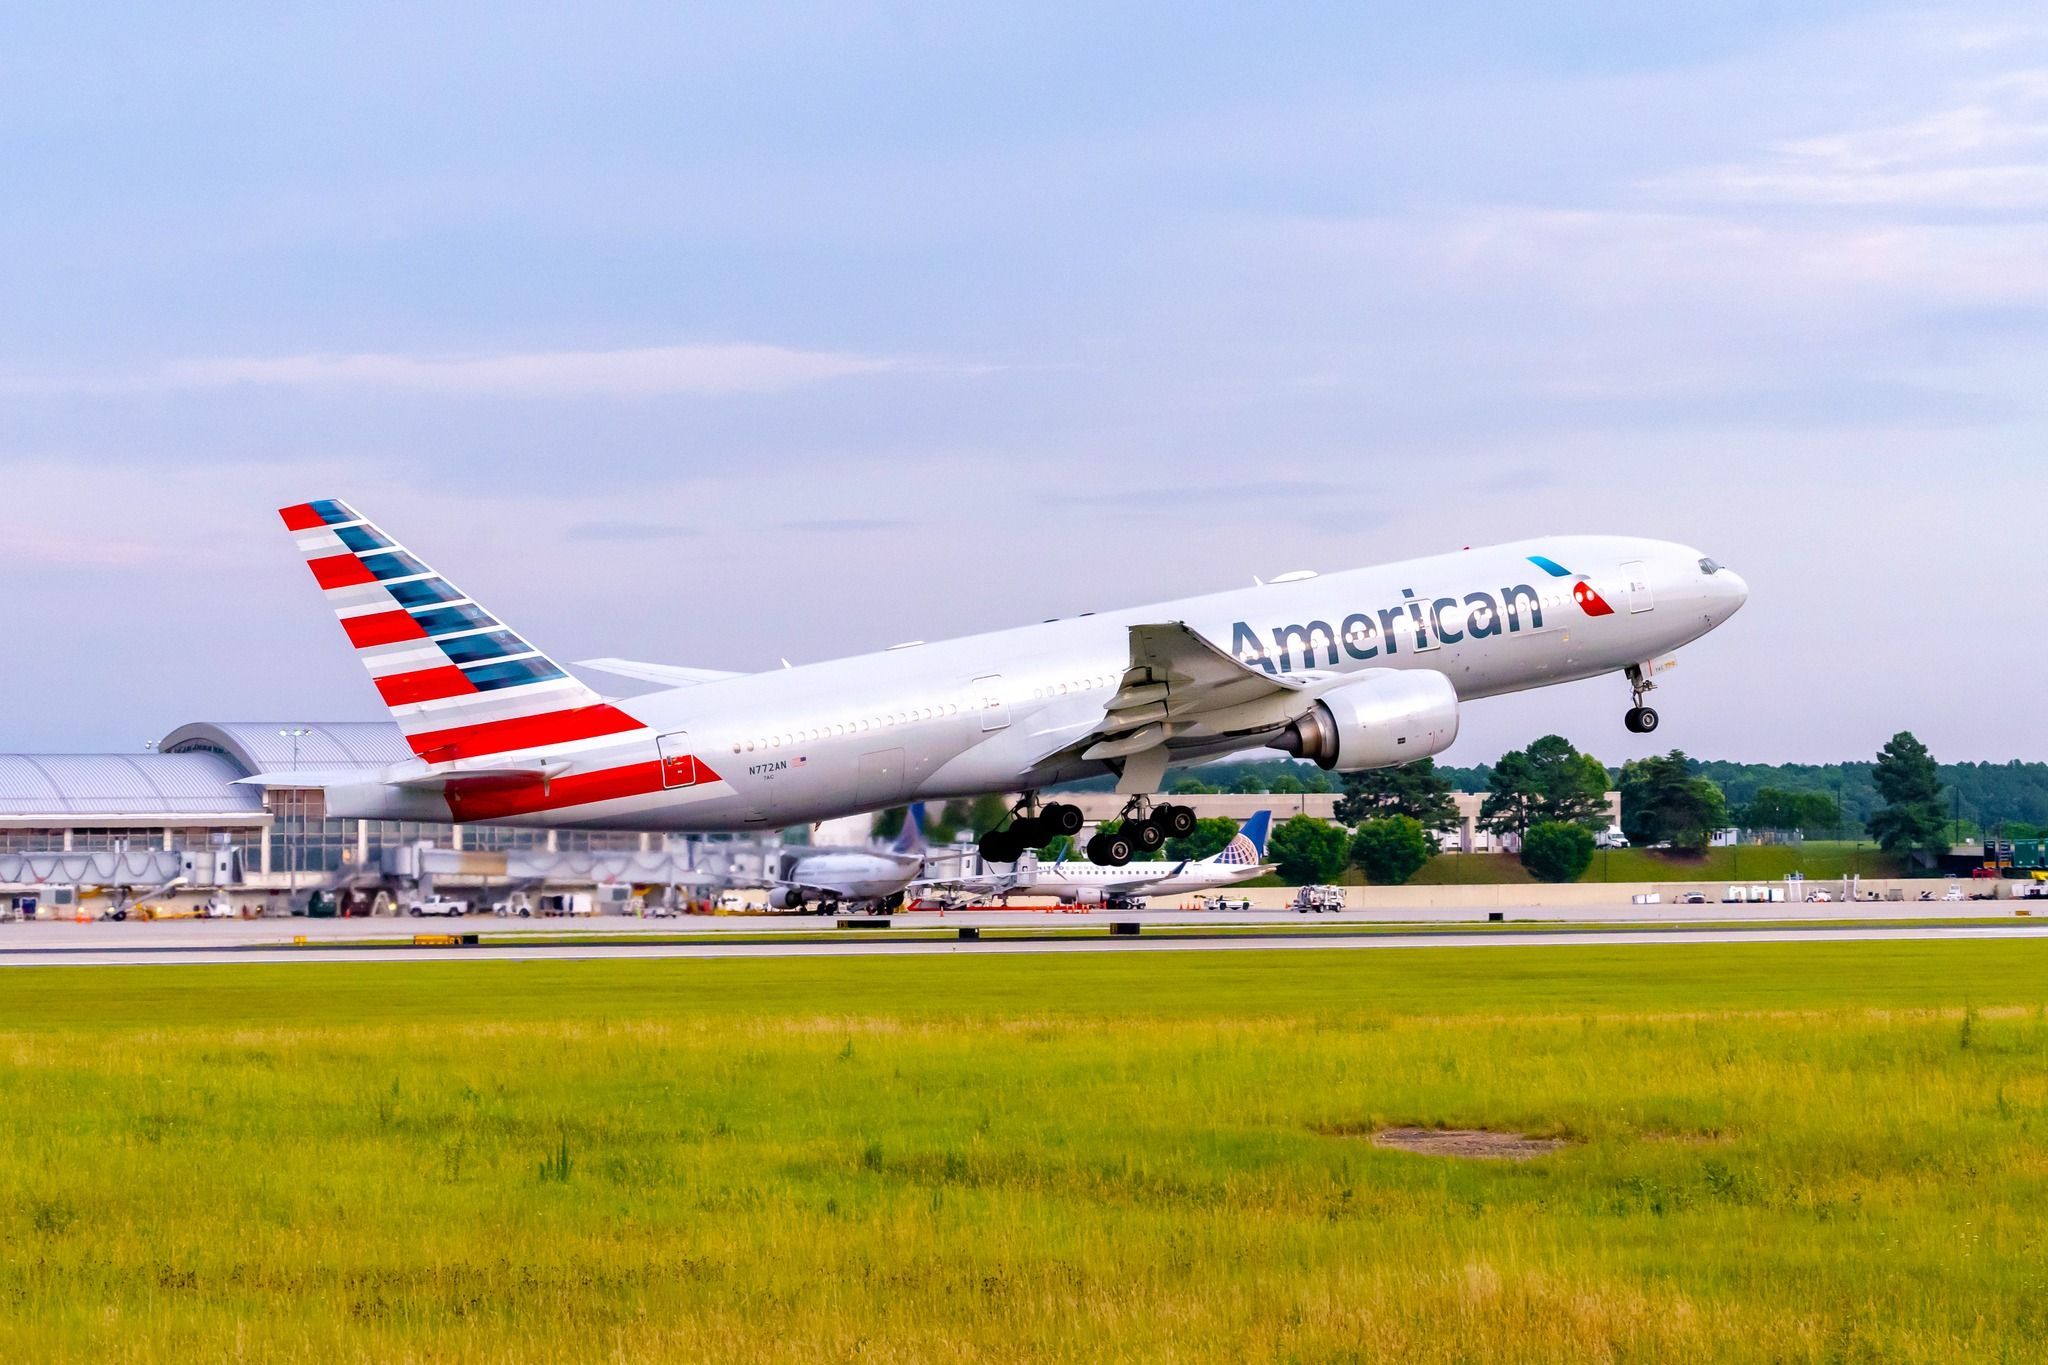 American Airlines Boeing 777-200ER taking off from Raleigh-Durham International Airport.